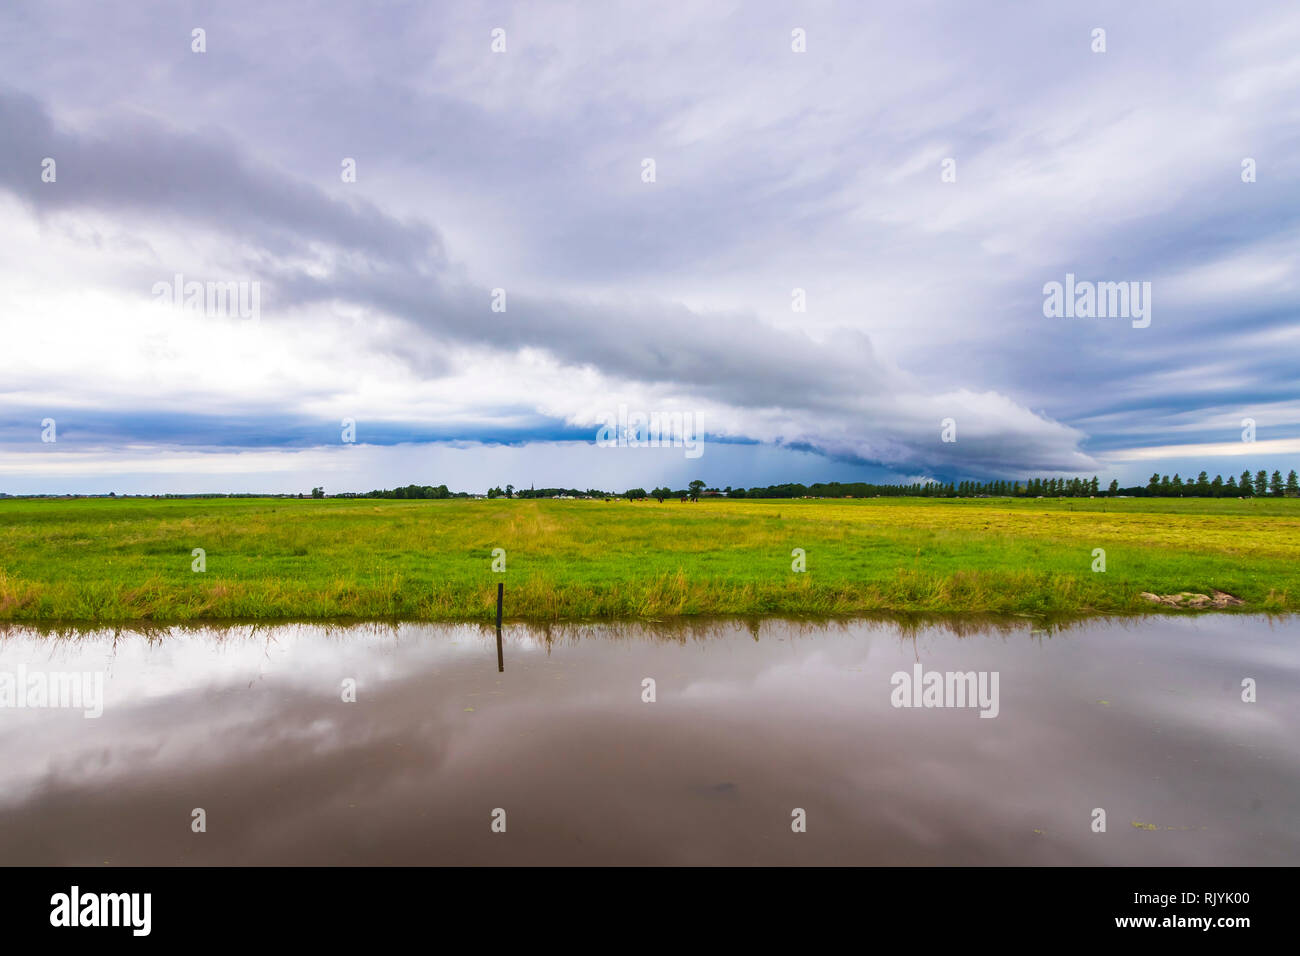 Shelf cloud and thunderstorm passing above green farmland and water in Zoetermeer, the Netherlands Stock Photo